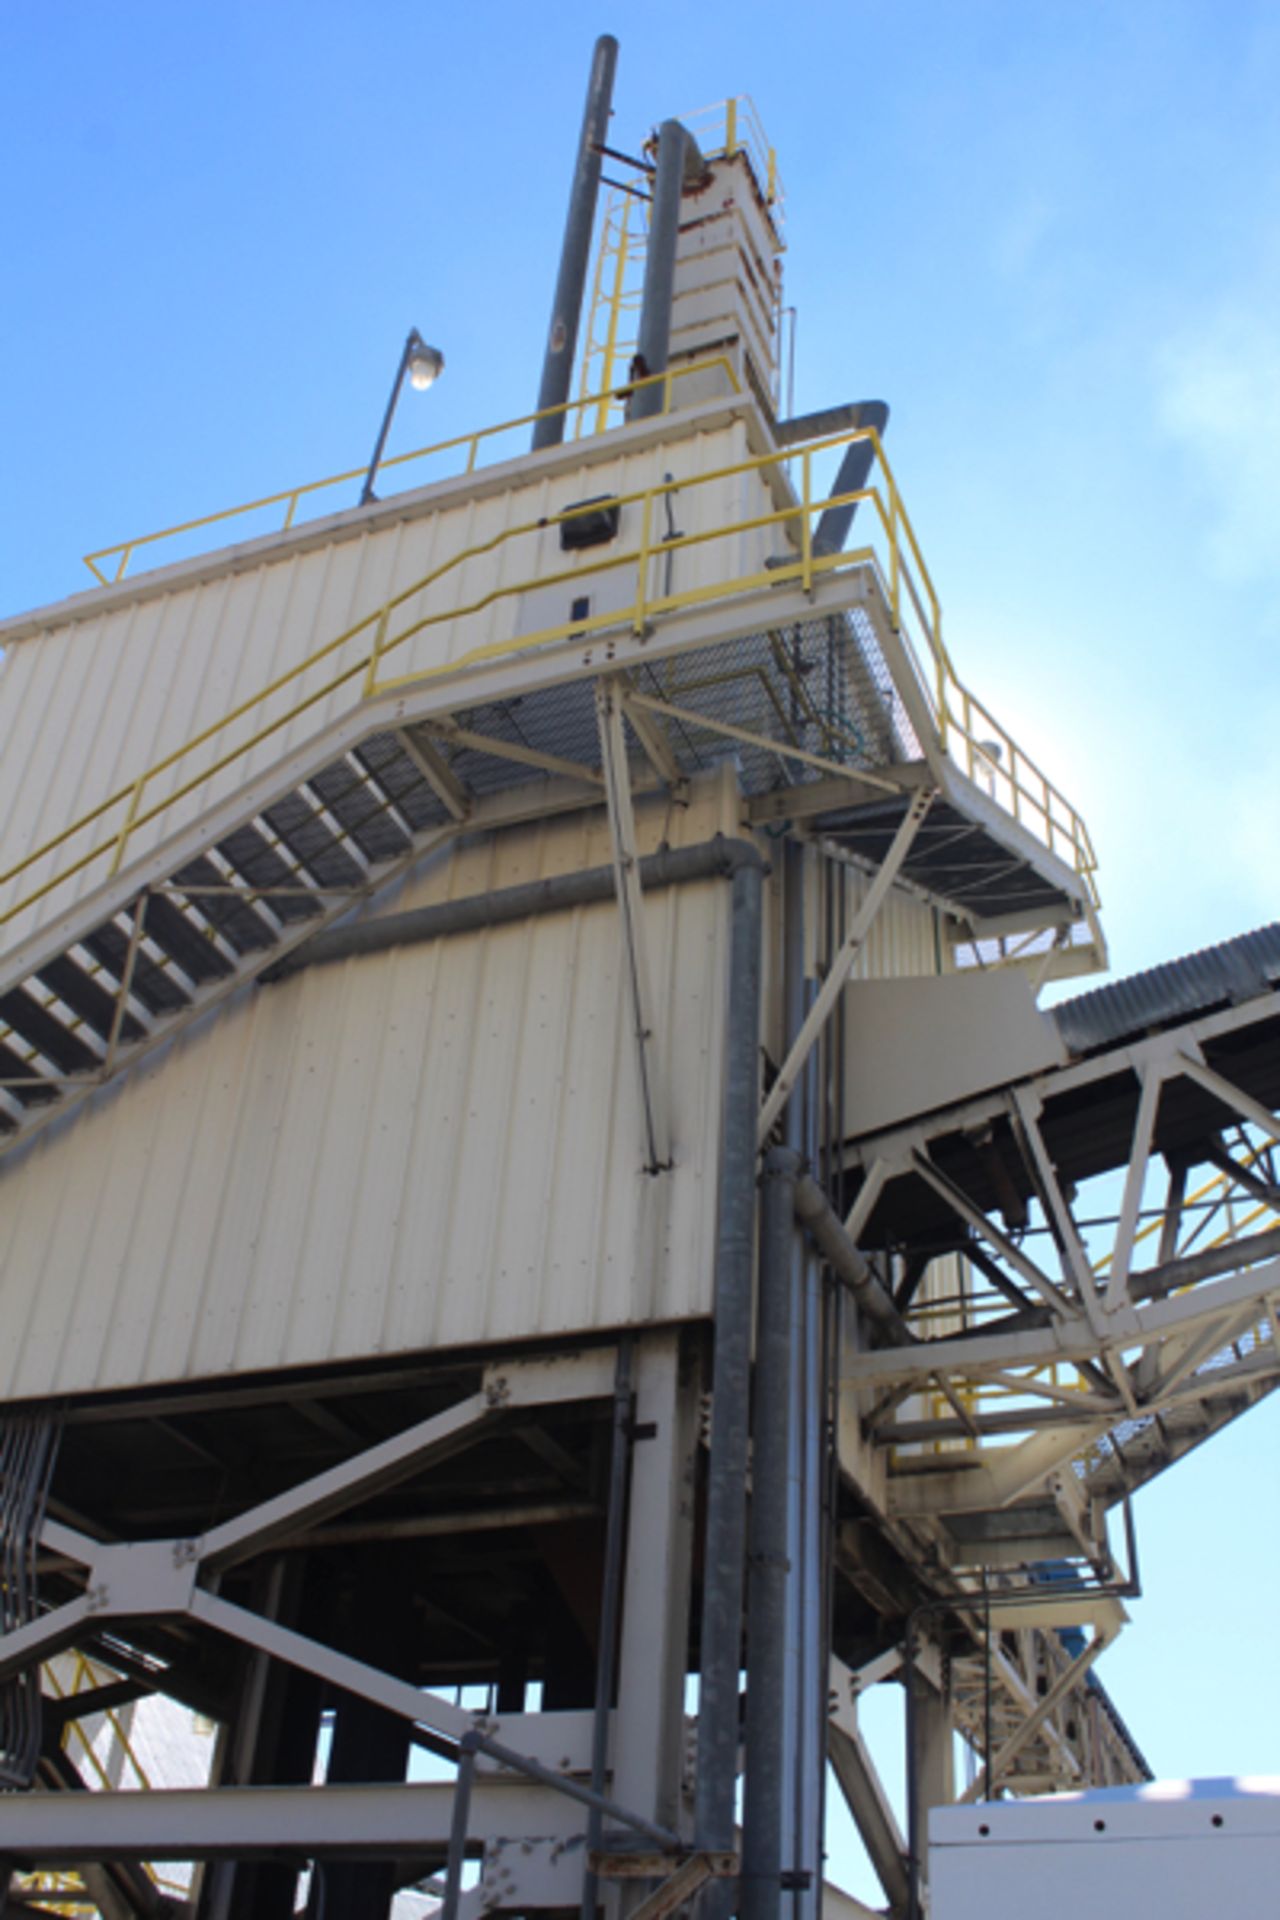 Coal Transfer Conveyor System, W/ Transfer Shack & Drives, 29" Belt, approx 550' | Location: Coal/ - Image 7 of 8